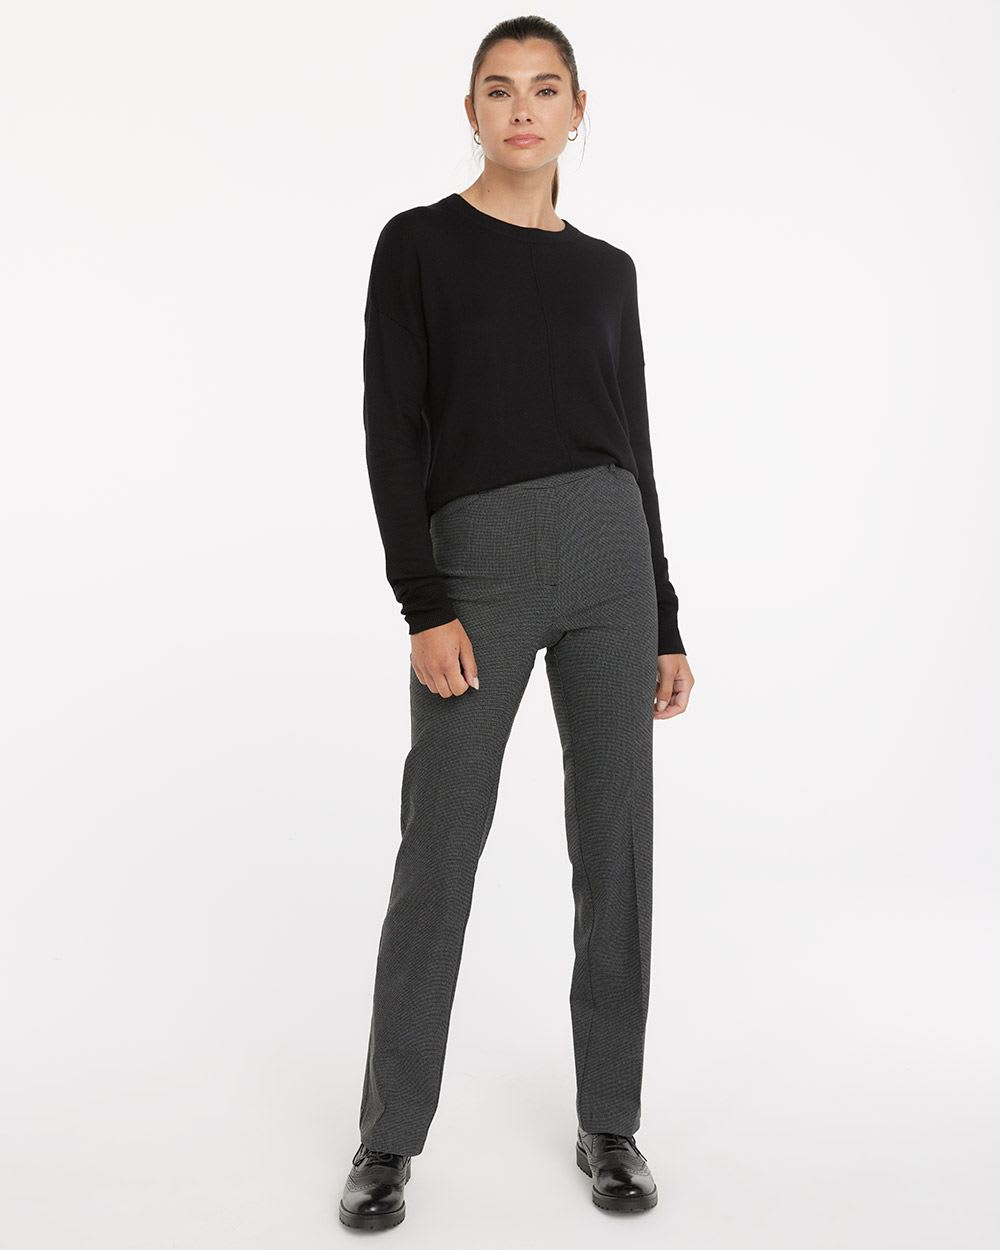 Grey Houndstooth Straight Leg Pants, The Iconic - Petite